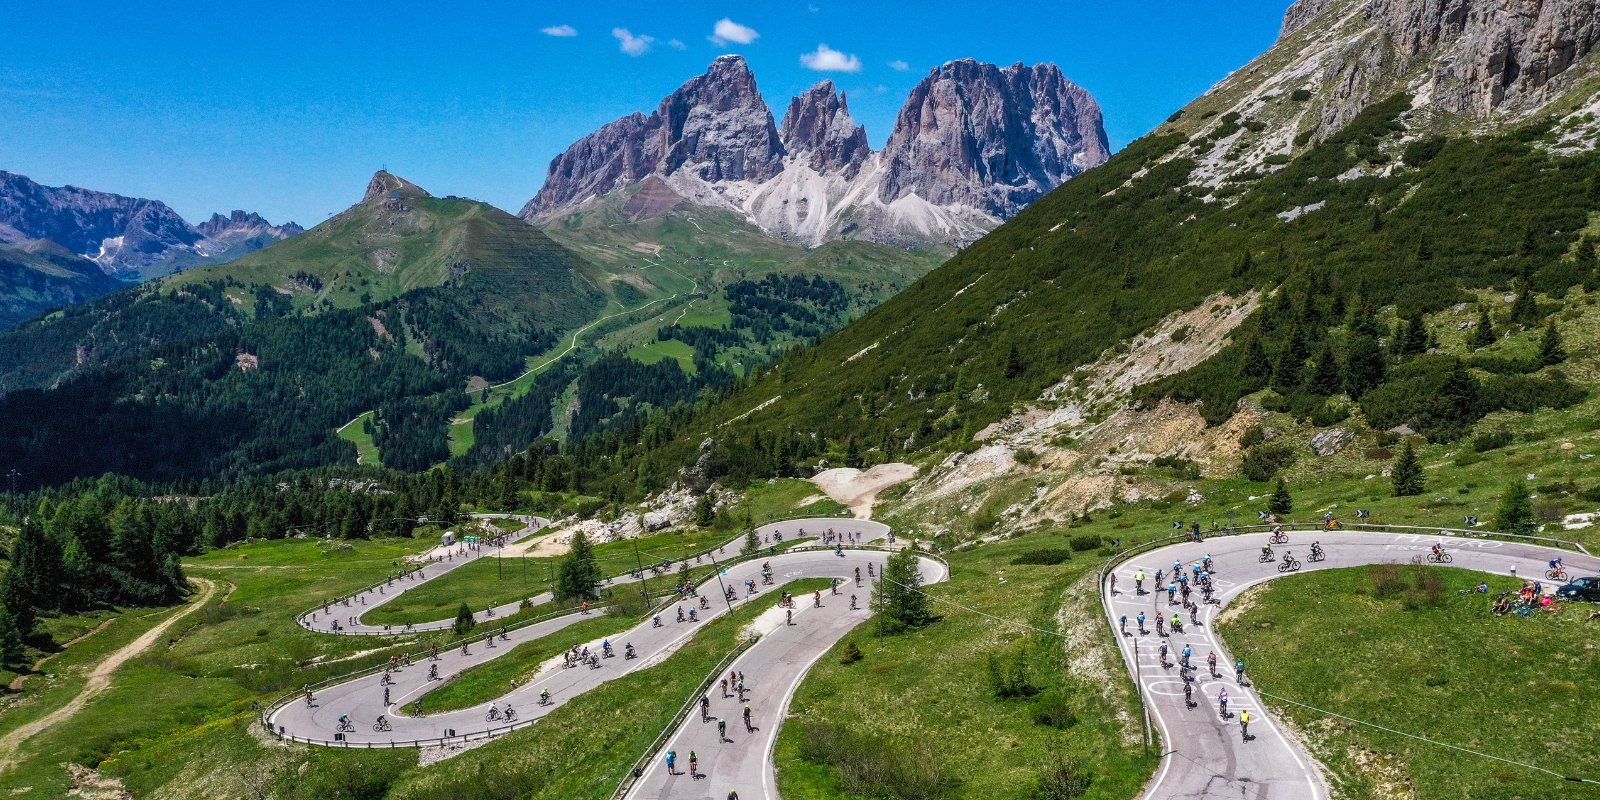 THE TOUR OF THE 4 DOLOMITIC PASSES: FROM EVENTS TO BIKE TOURS